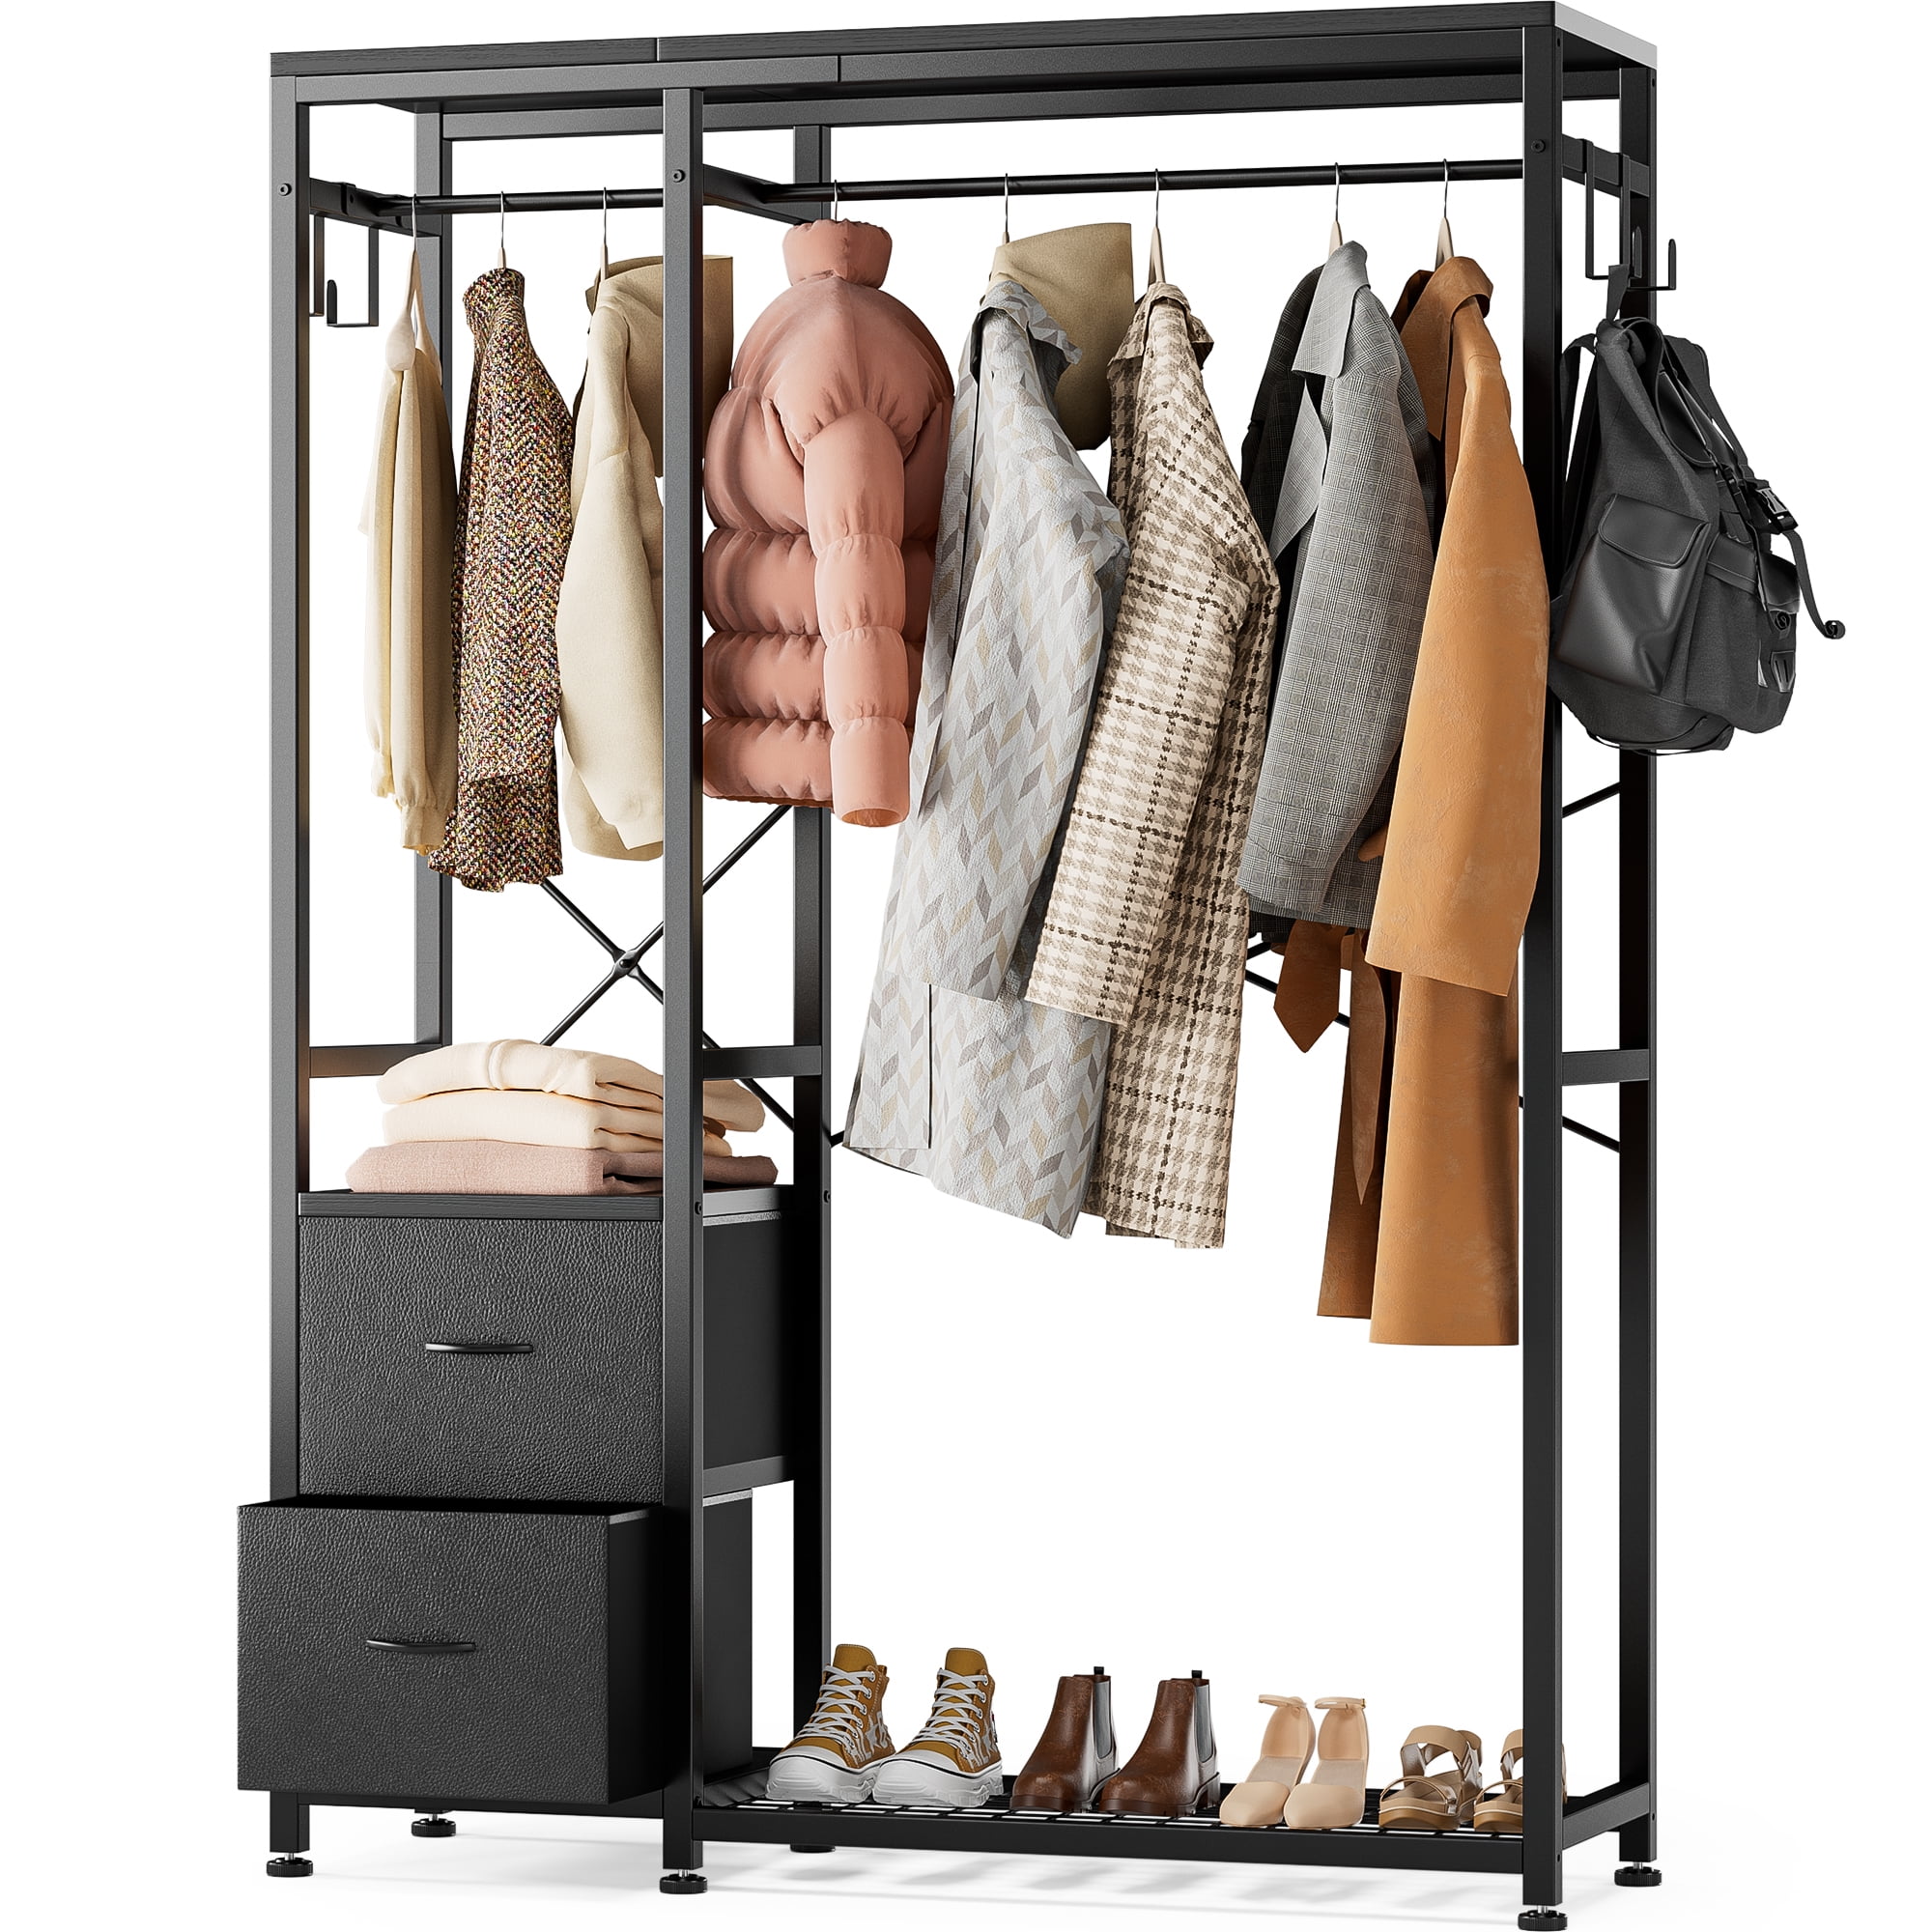  Lulive Clothes Rack, Heavy Duty Garment Rack for Hanging Clothes,  Industrial Clothing Racks with Shelves, 2 Fabric Drawers, 4 Hooks, 2 Hanging  Rods, Freestanding Closet Organizer (Modern) : Home & Kitchen